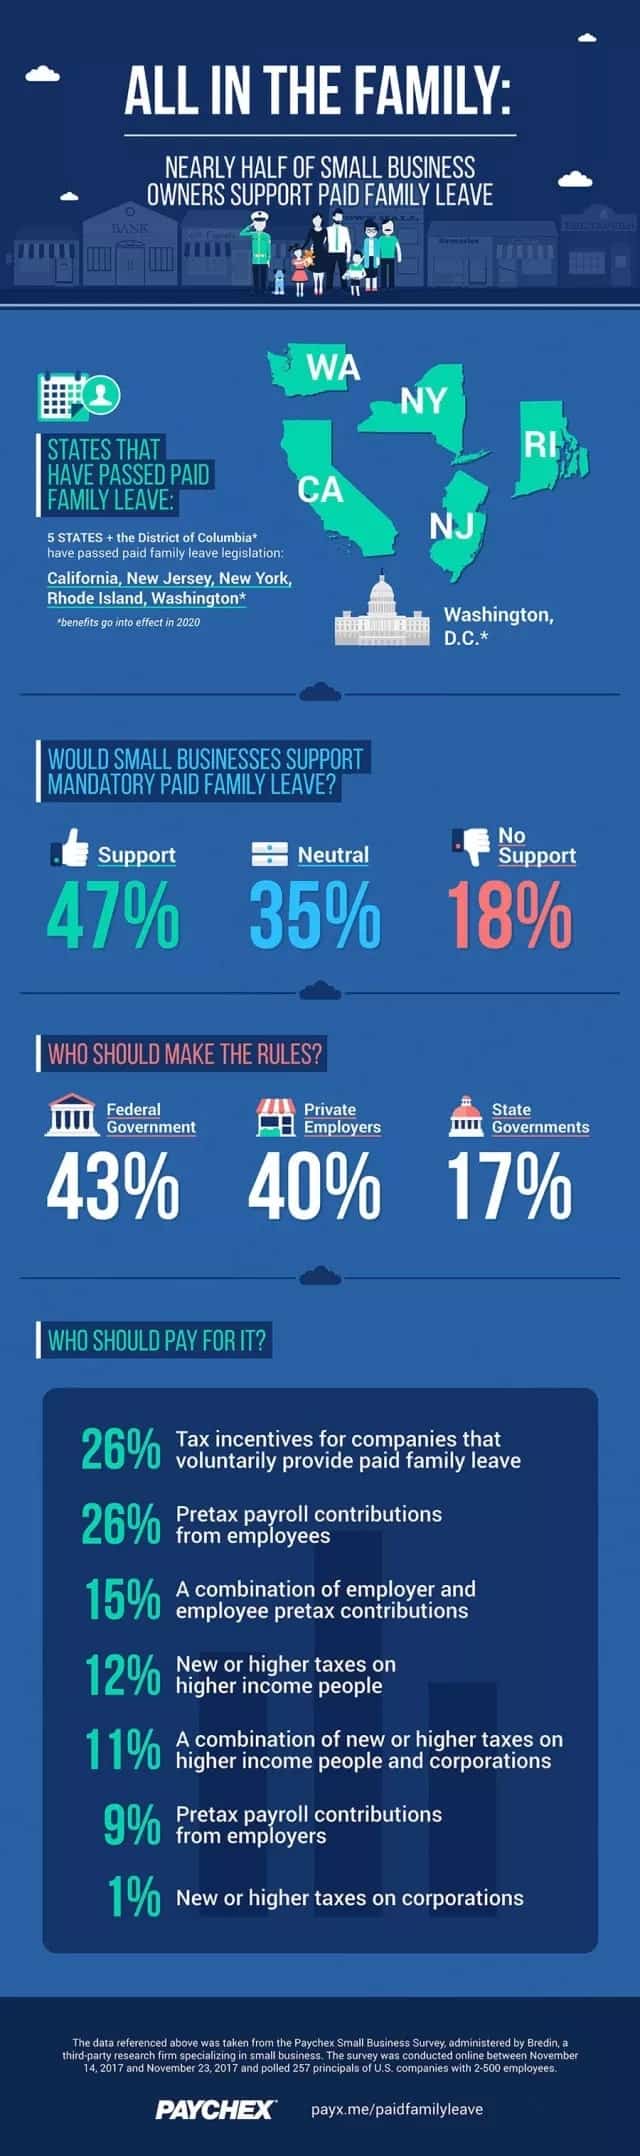 infographic showing how small business owners support family leave